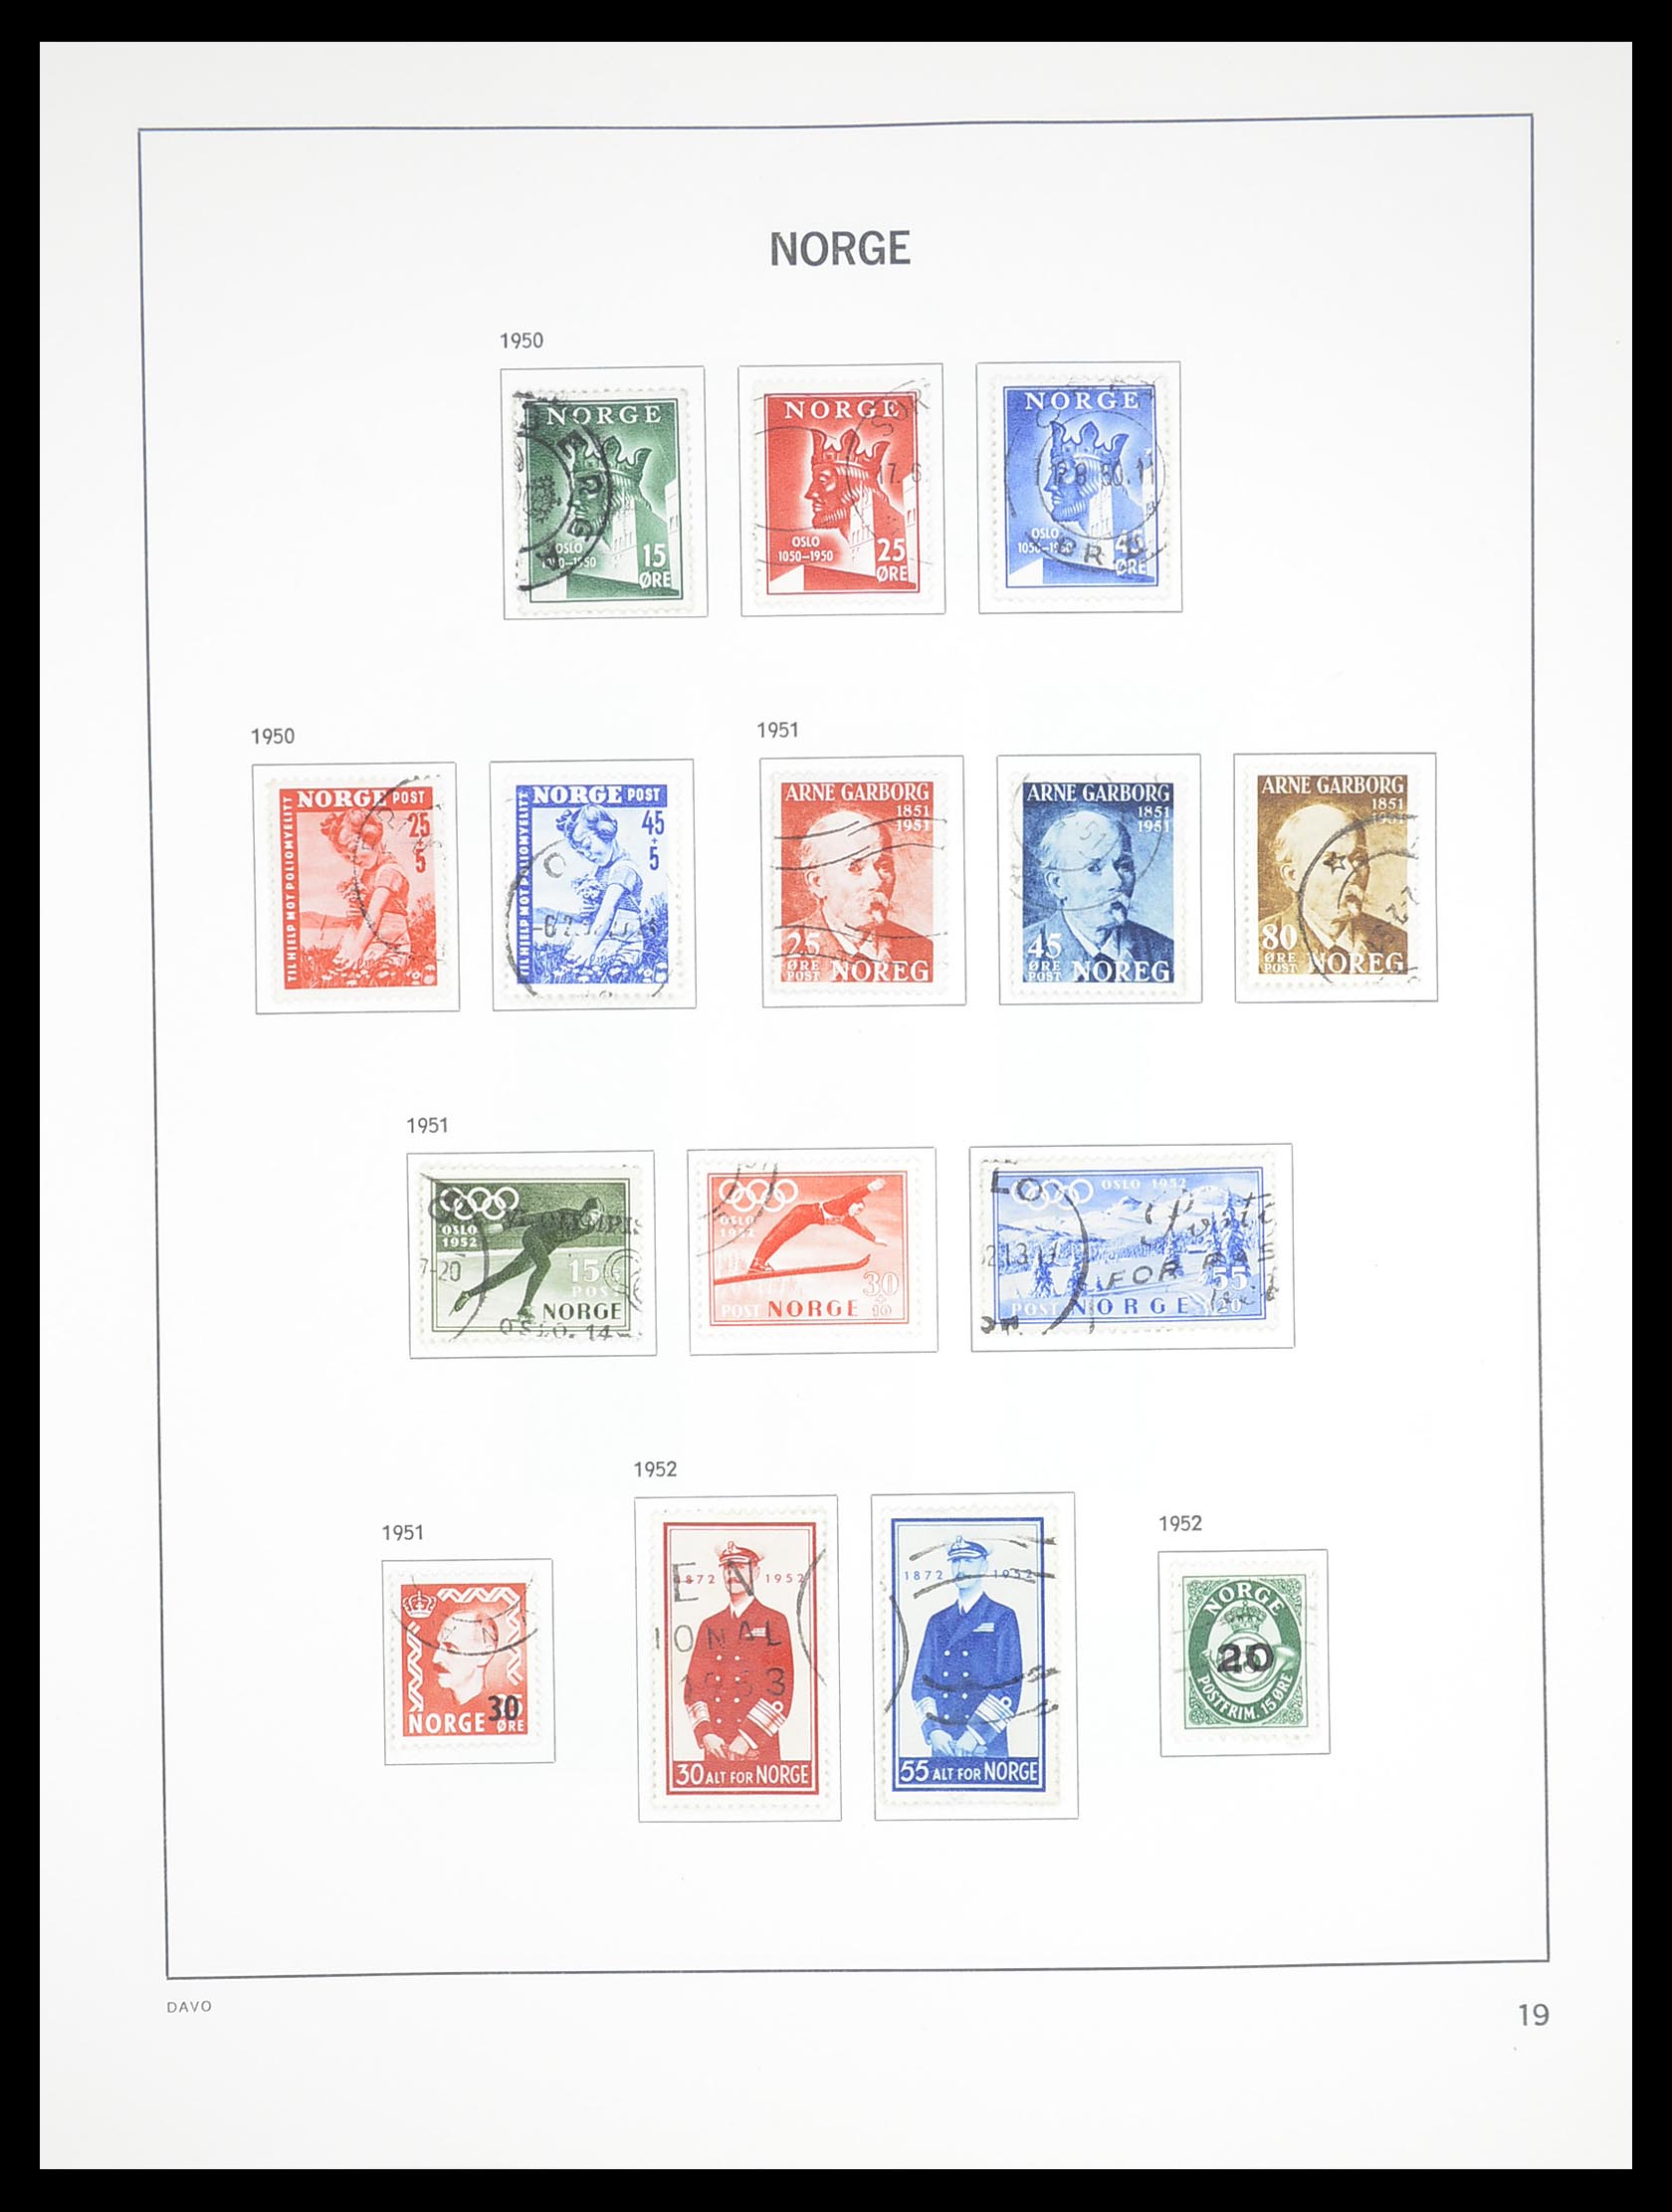 33389 024 - Stamp collection 33389 Norway 1856-2013.